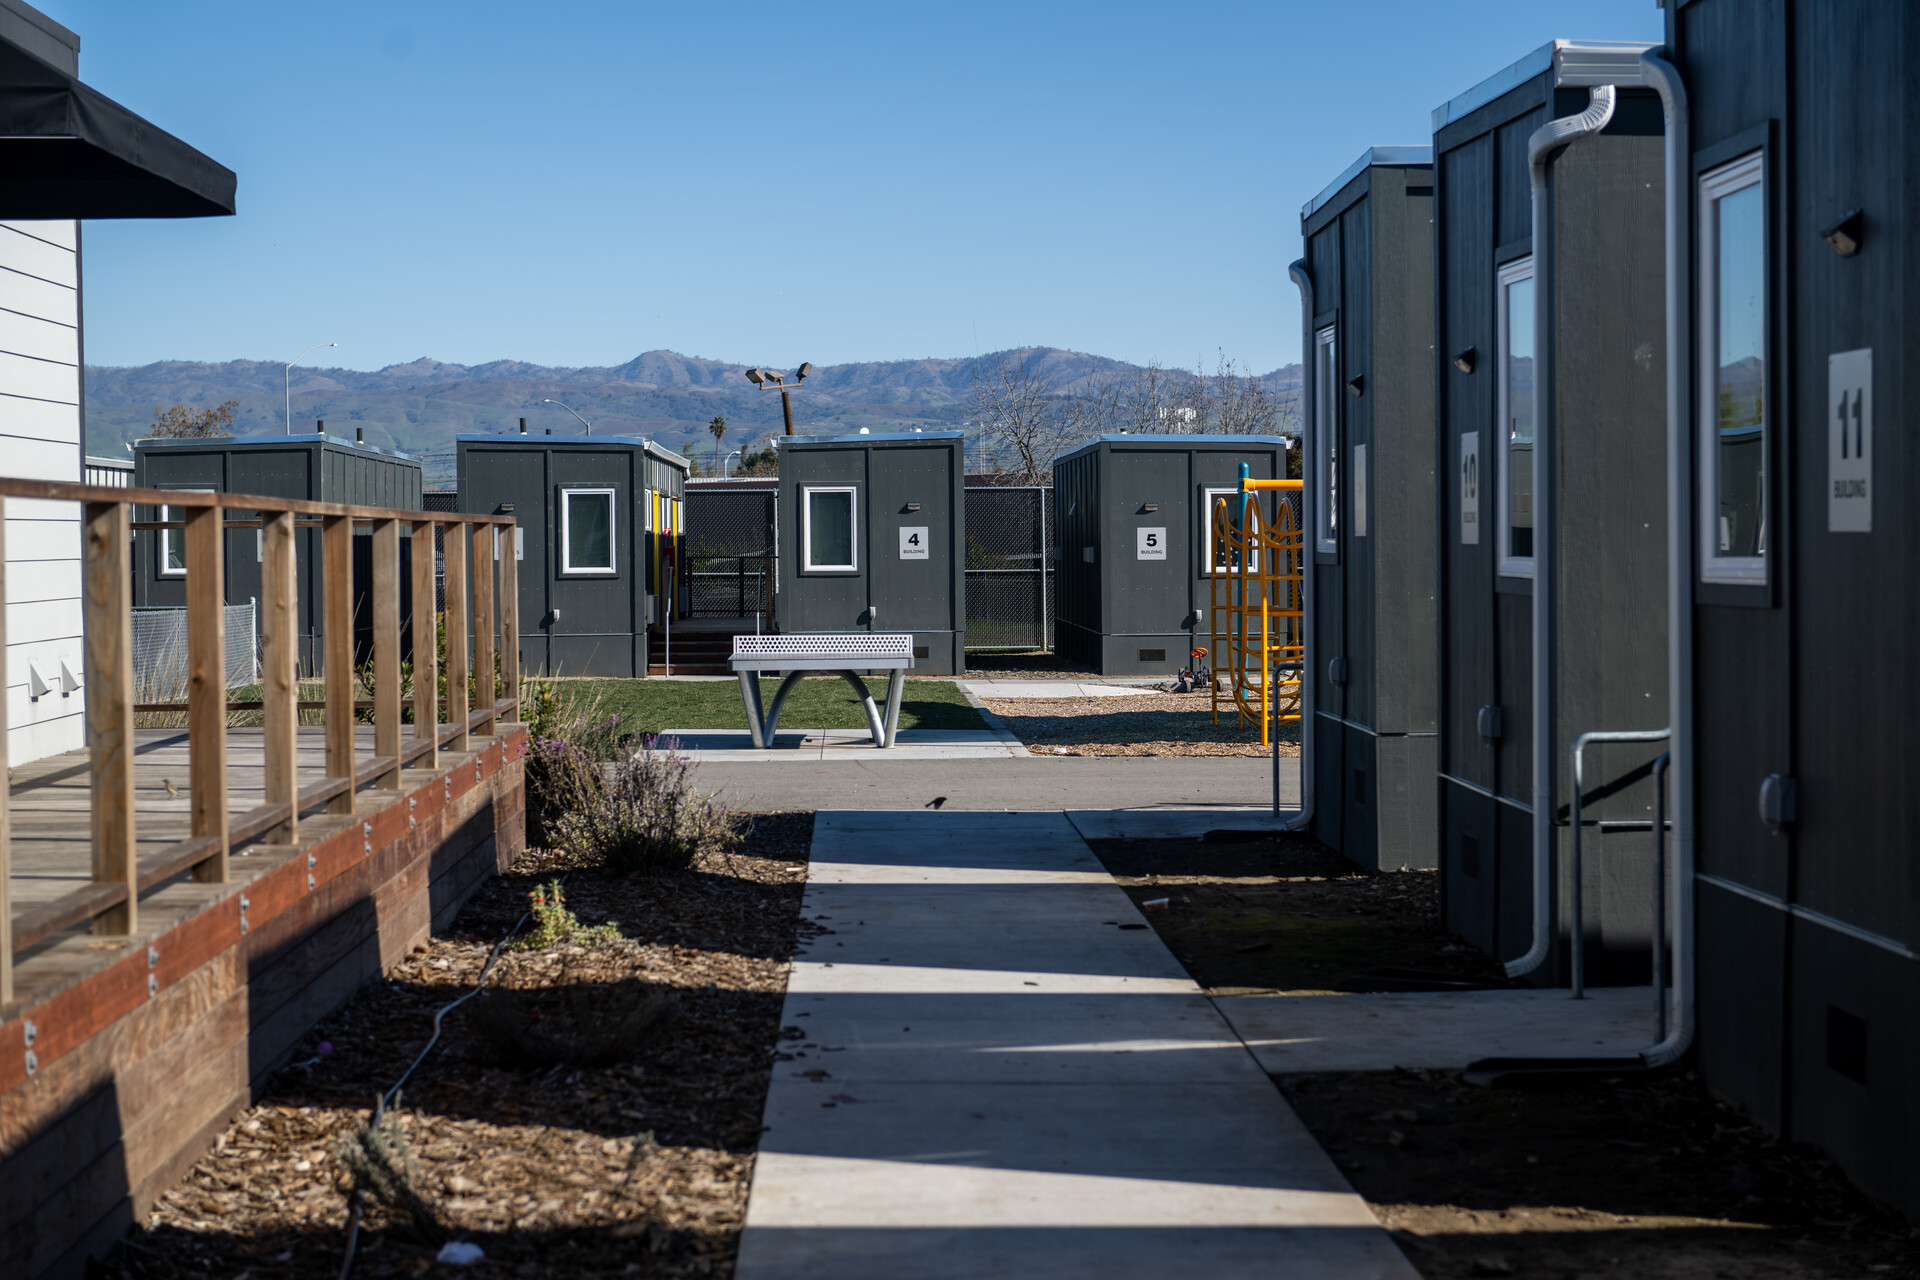 Neat rows of gray shipping containers with a singular white window in each line a sidewalk with well-manicured flower beds filled with brown bark. A mountain range is seen in the background.